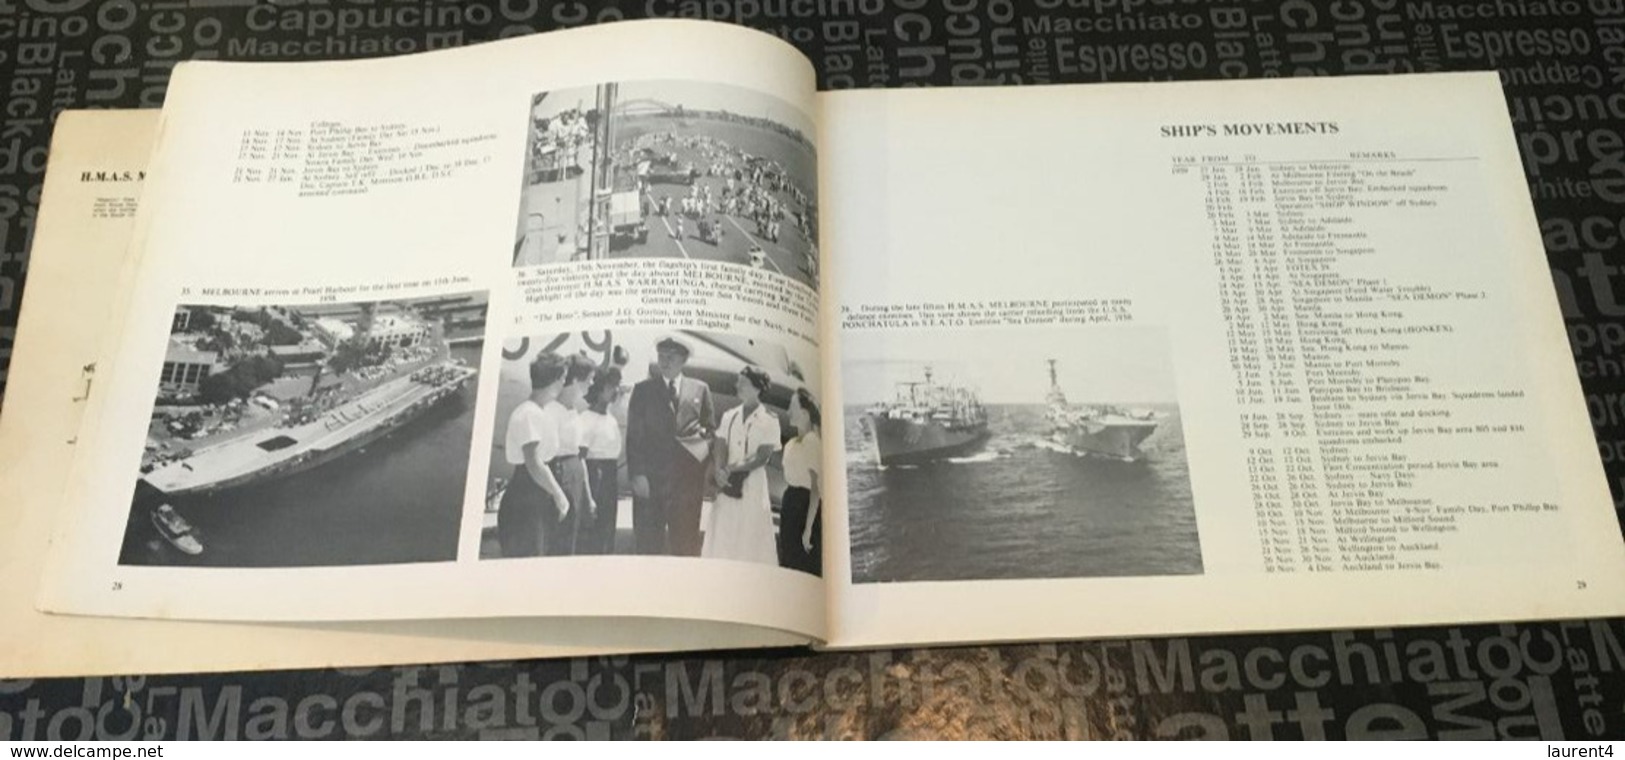 (Book) Australia - HMAS Melbourne - 25 Years -  128 Pages (weight / Poid 420g) - Foreign Armies